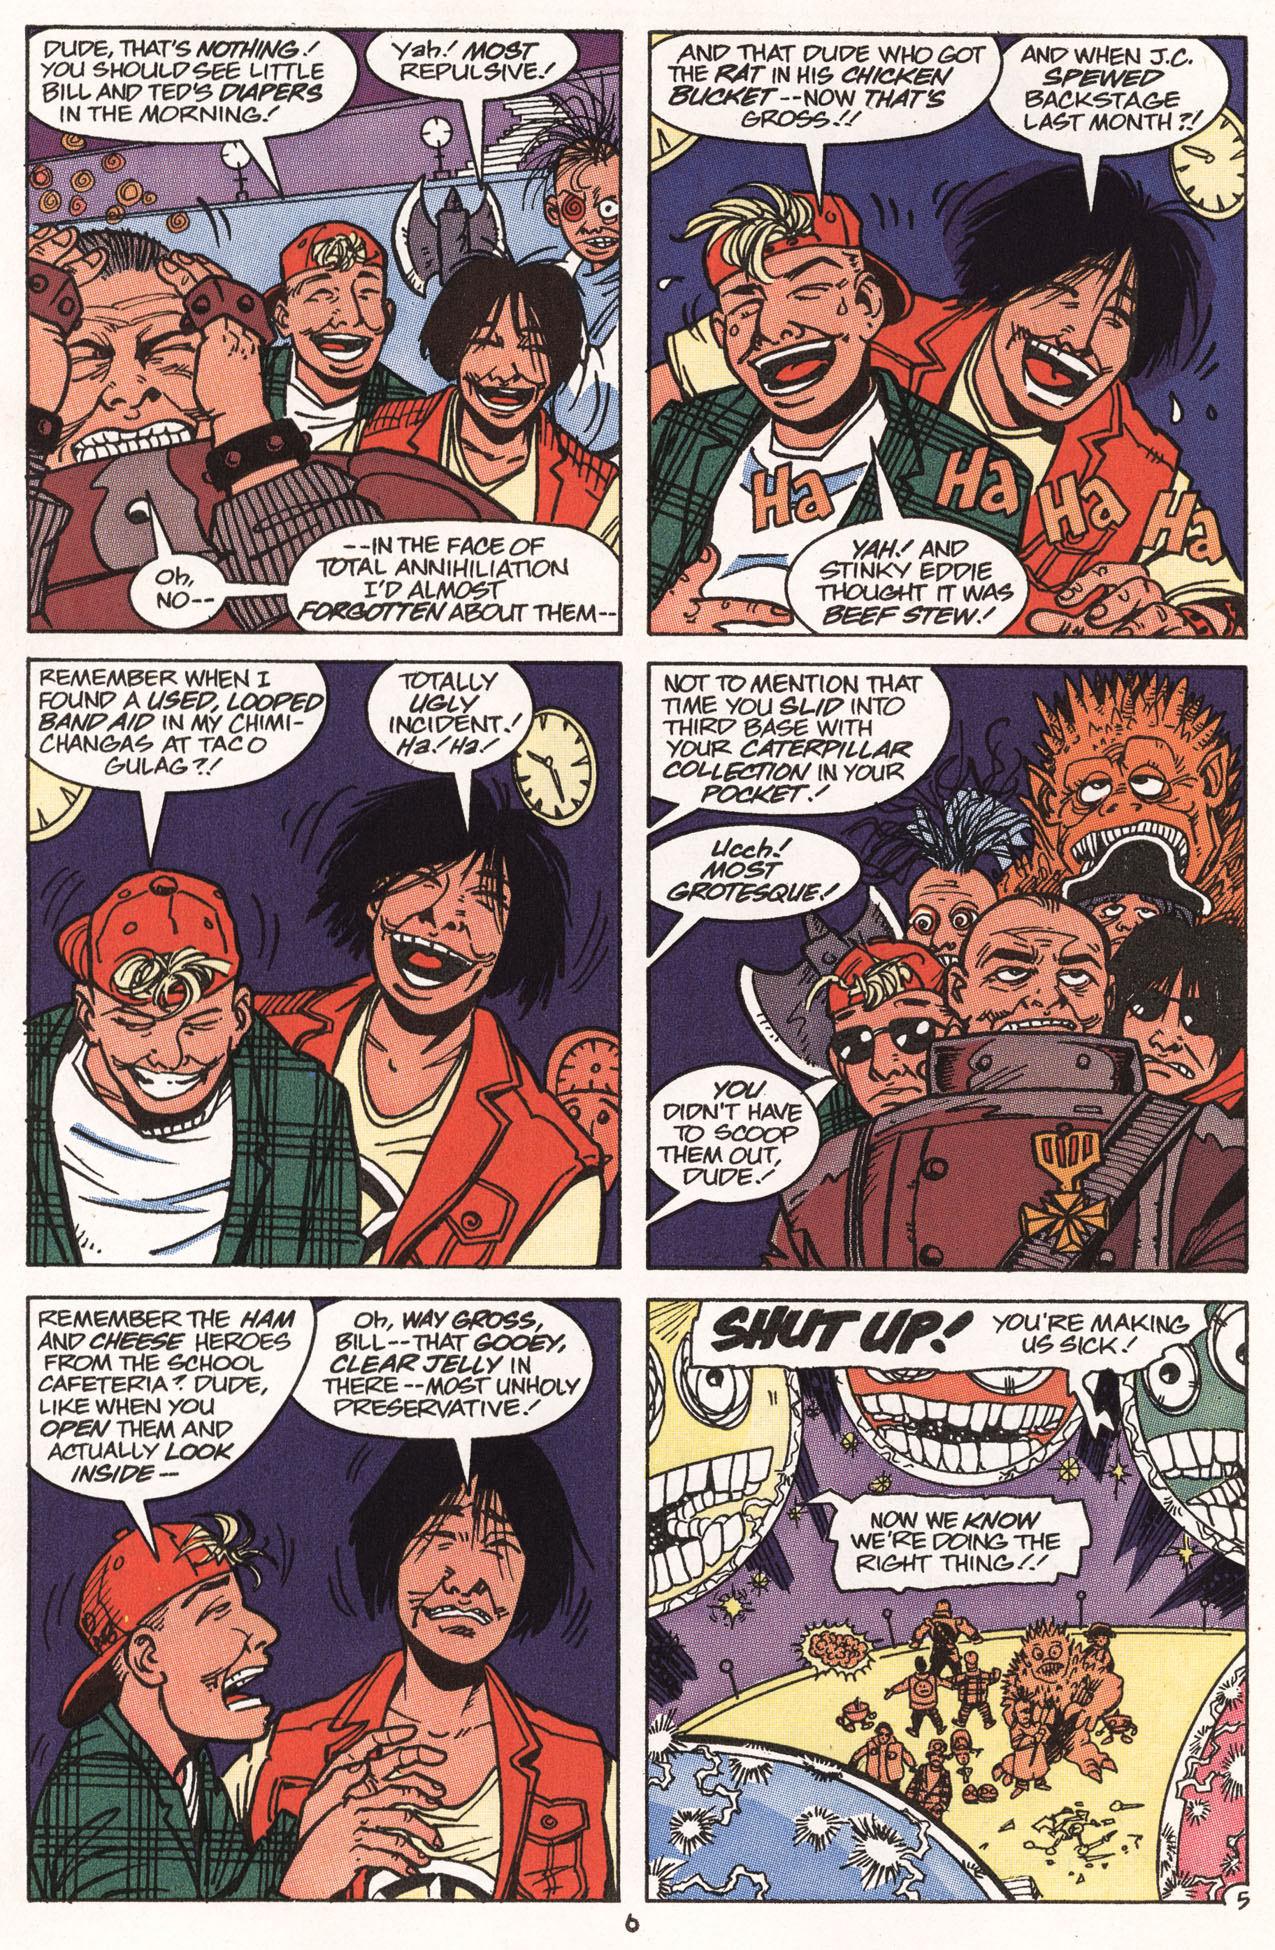 Read online Bill & Ted's Excellent Comic Book comic -  Issue #7 - 8